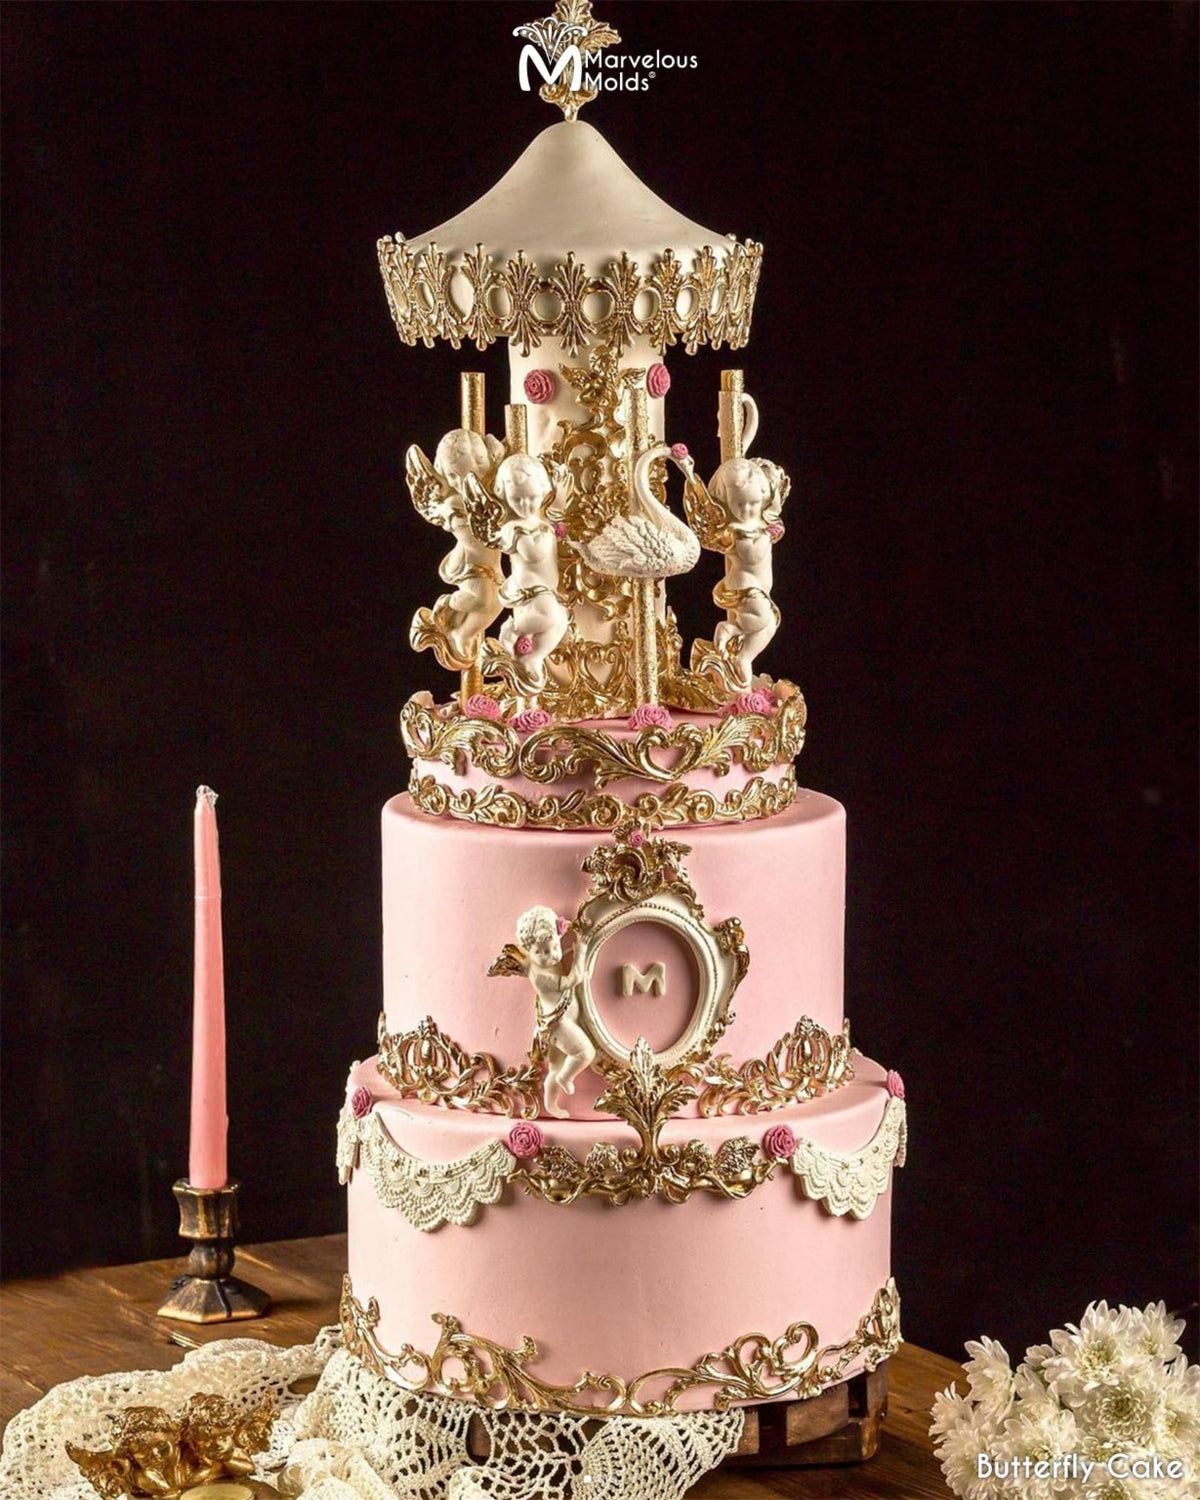 Angel Carousel Wedding Cake Decorated Using the Marvelous Molds Karen Lace Silicone Mold